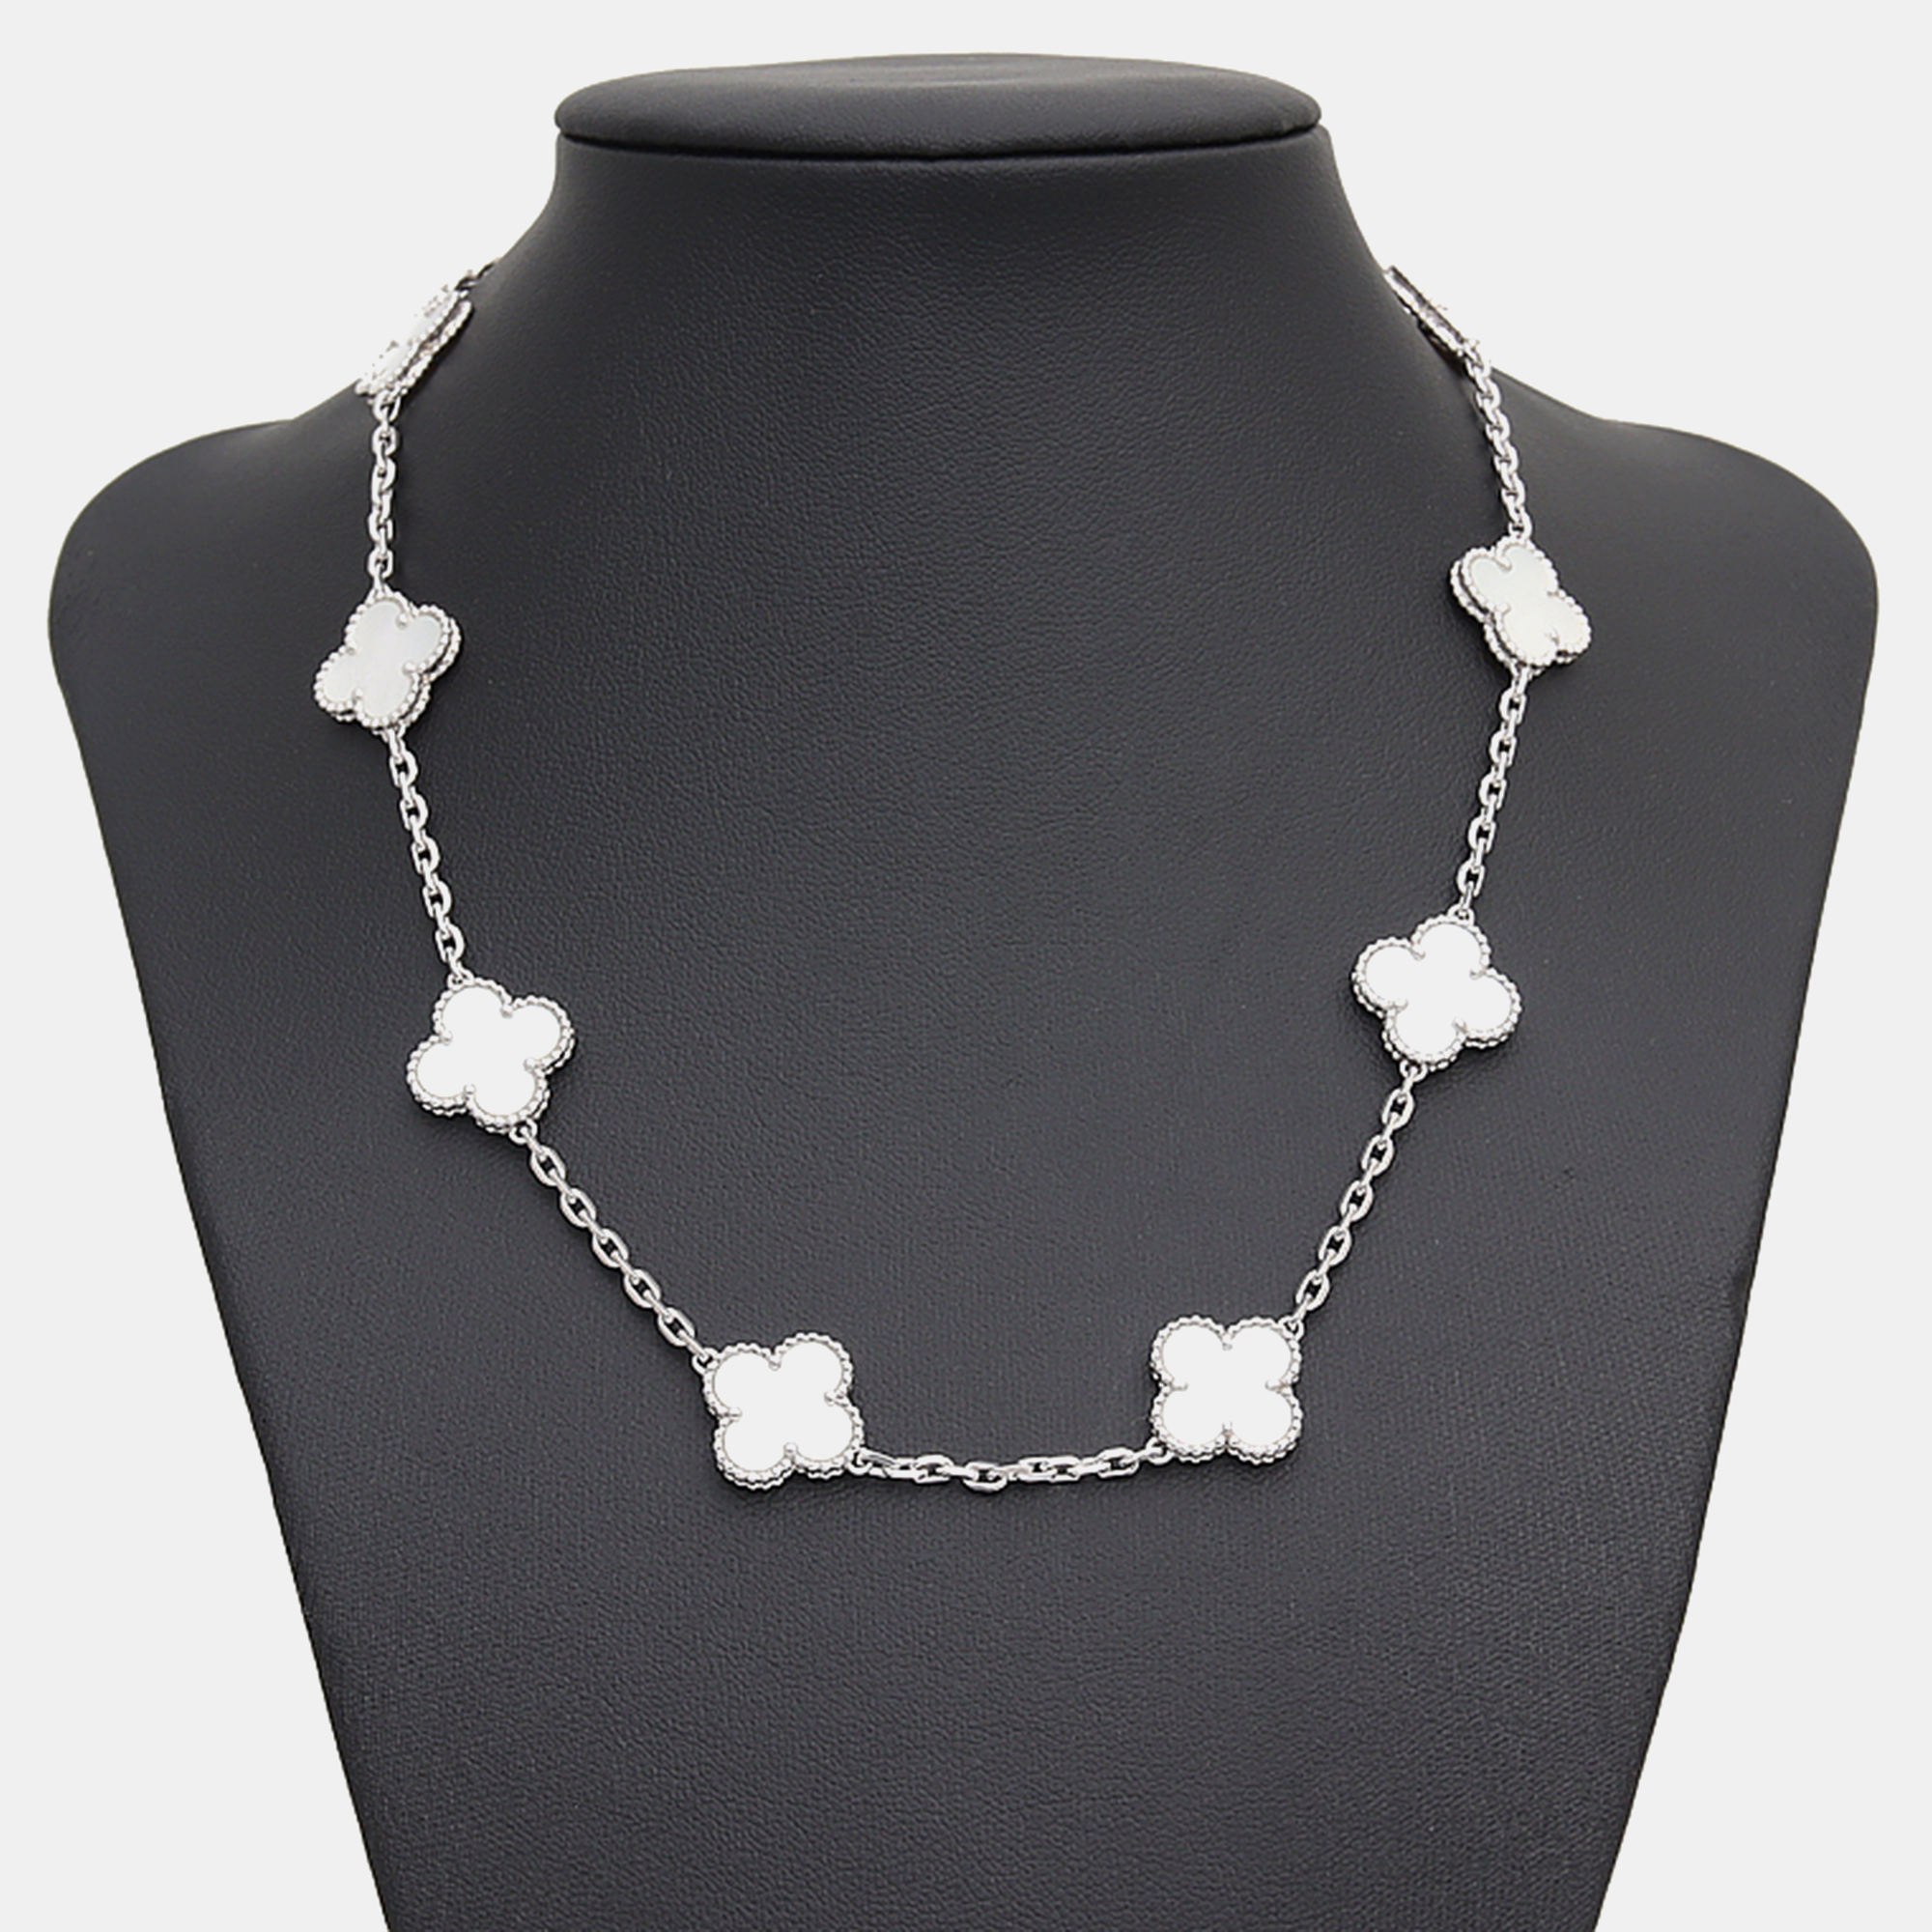 Van cleef & arpels 18k white gold and mother of pearl vintage alhambra 10 motifs necklace